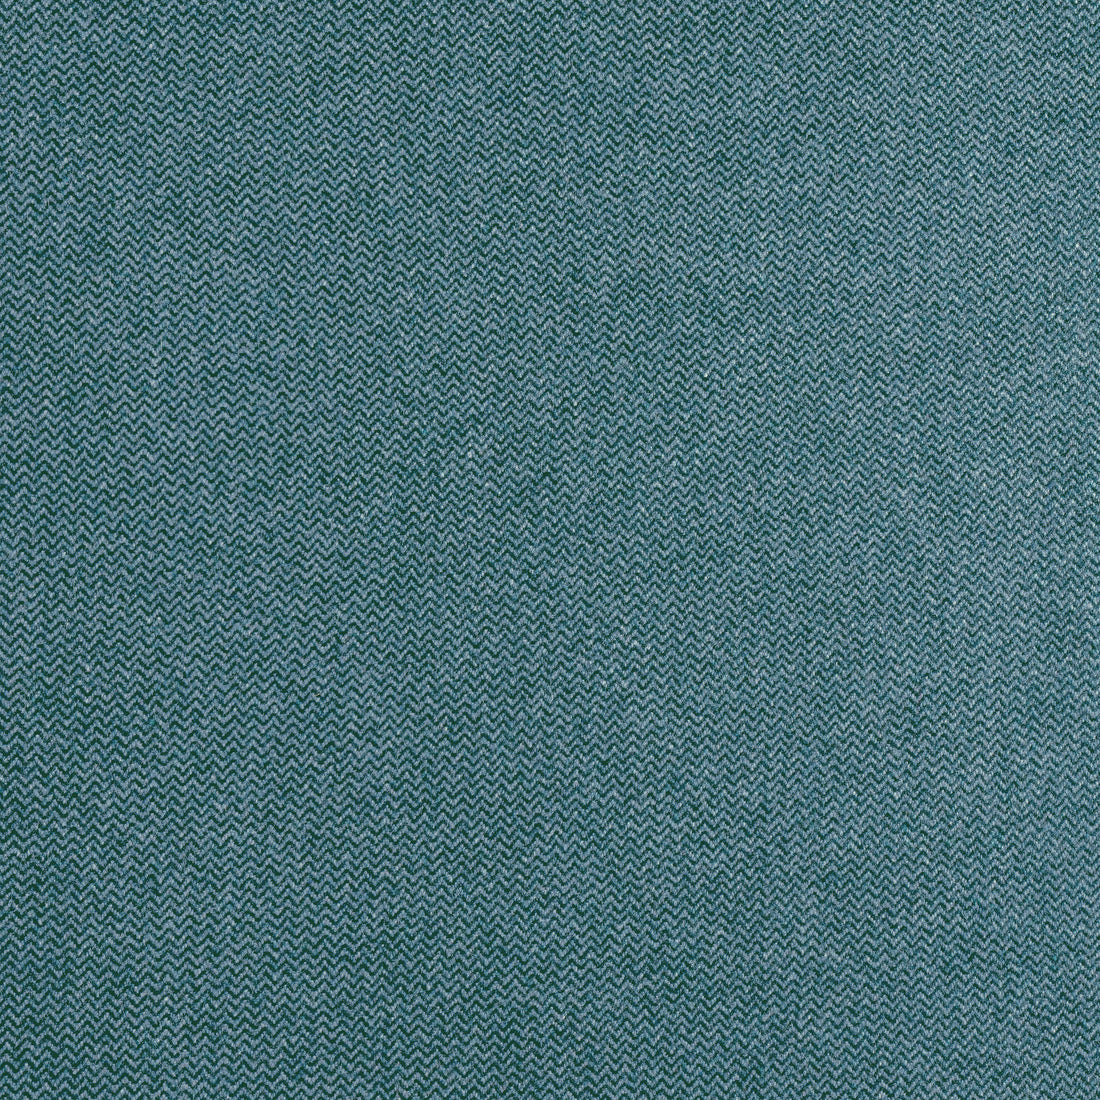 Dorset fabric in lagoon color - pattern number W80912 - by Thibaut in the Dunmore collection